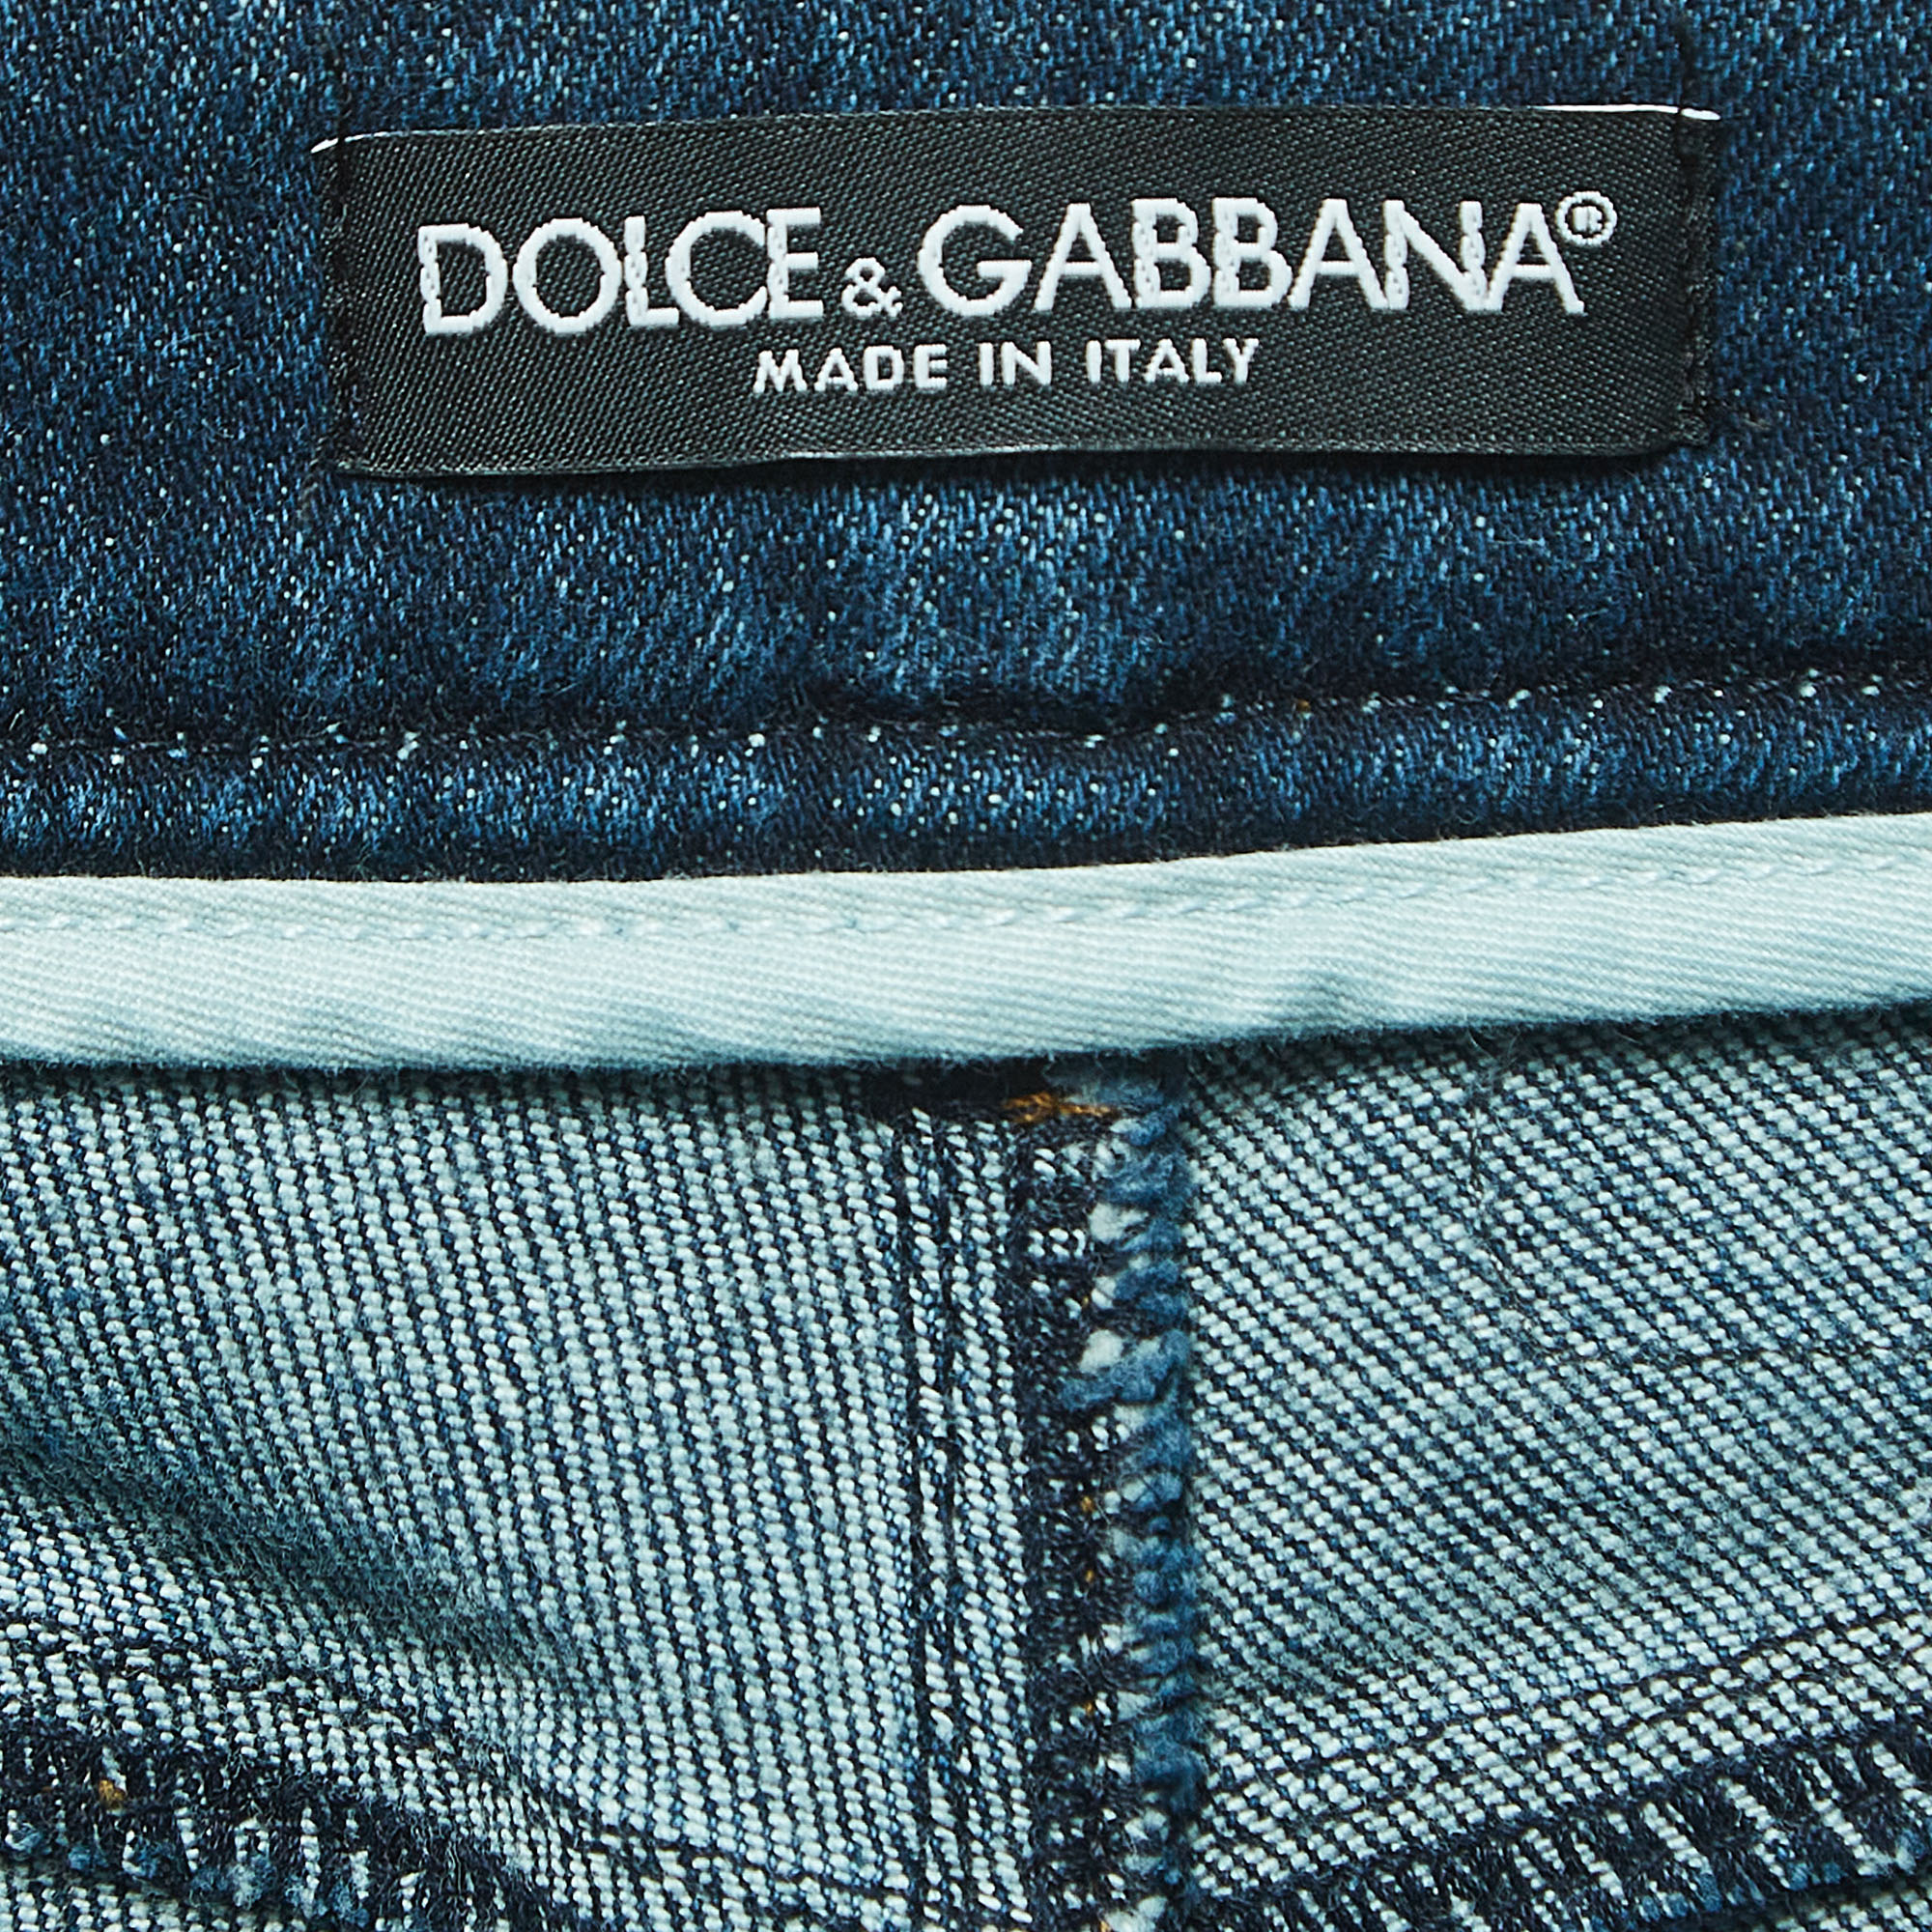 Dolce & Gabbana Blue Distressed Patched Denim Skinny Jeans S